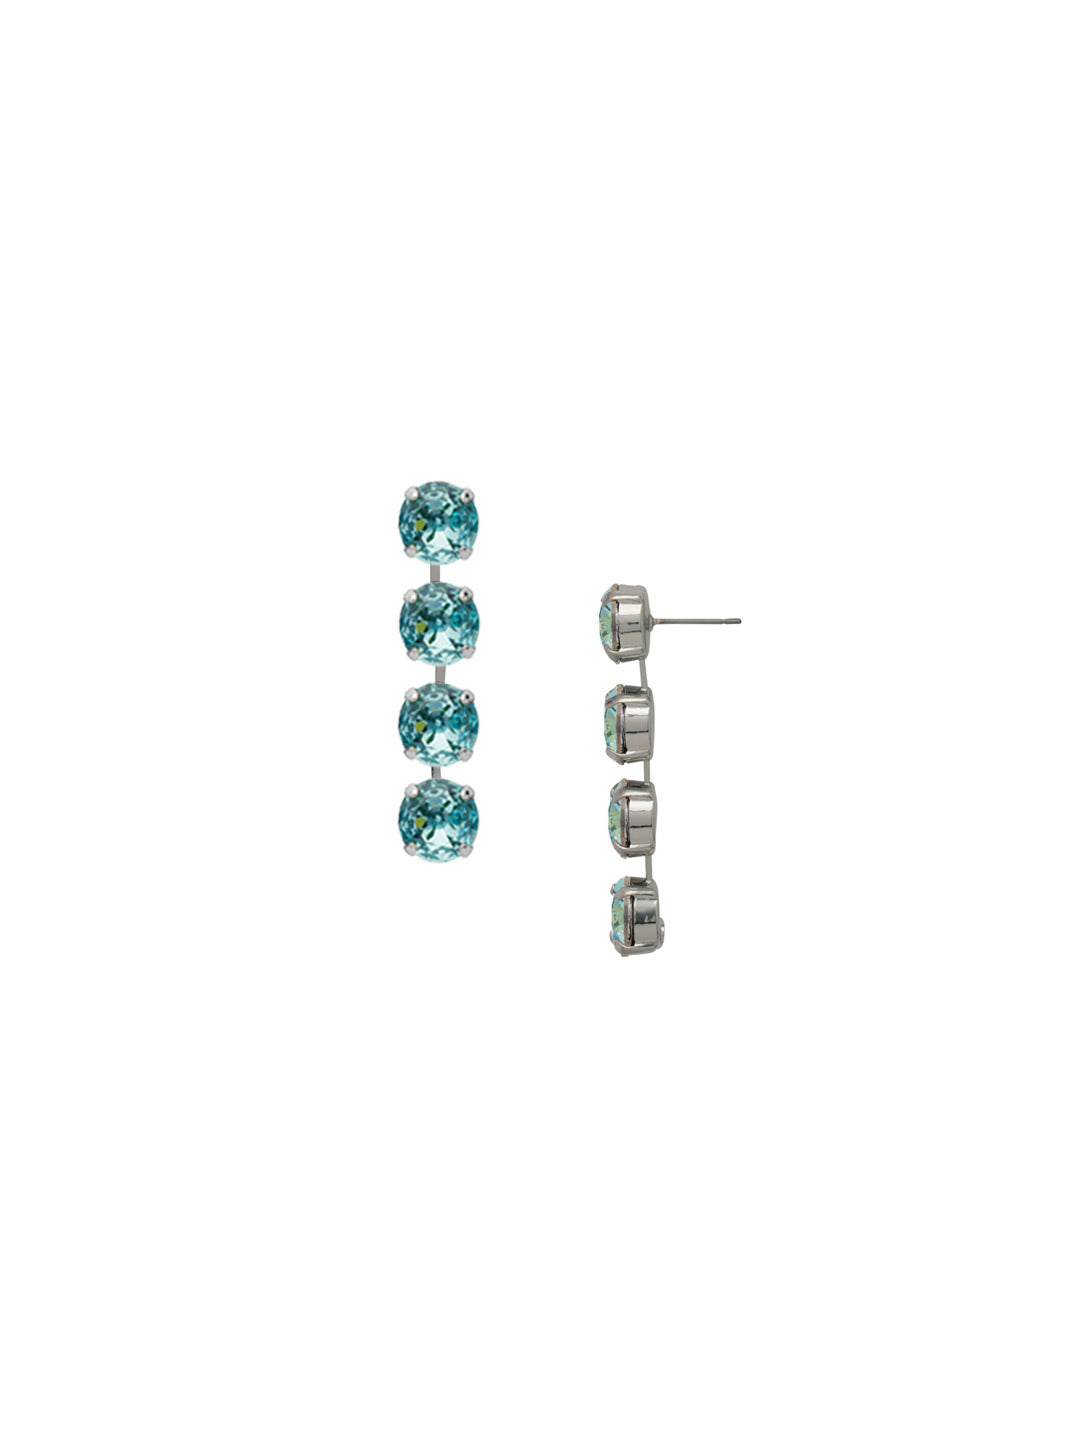 Matilda Dangle Earrings - EFH1PDAQU - <p>The Matilda Dangle Earrings feature a row of 4 round cut crystals on a post. From Sorrelli's Aquamarine collection in our Palladium finish.</p>